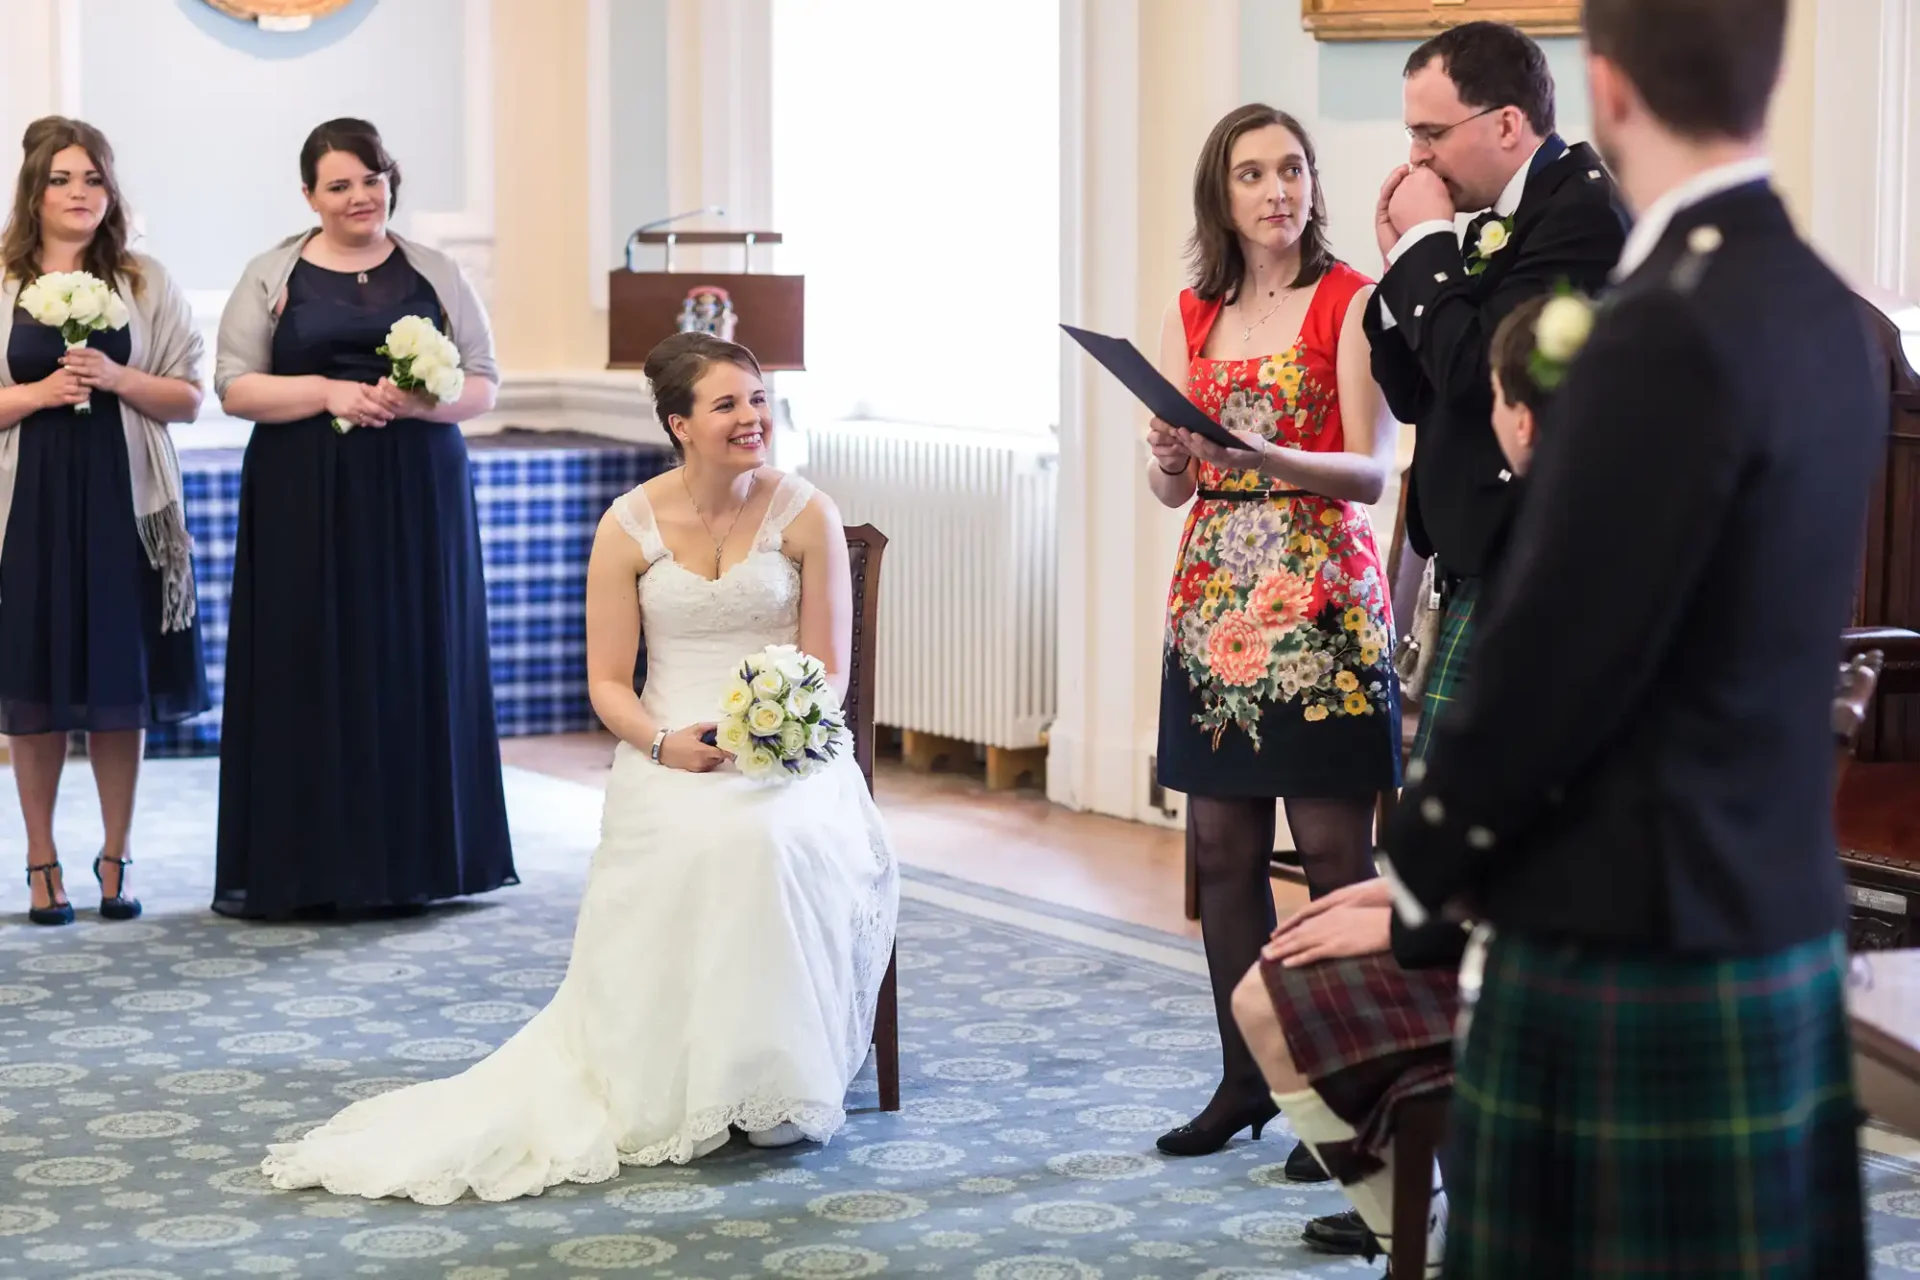 A bride seated, laughing joyfully at her wedding ceremony, with groom, officiant, and bridesmaids nearby in a room with elegant decor.